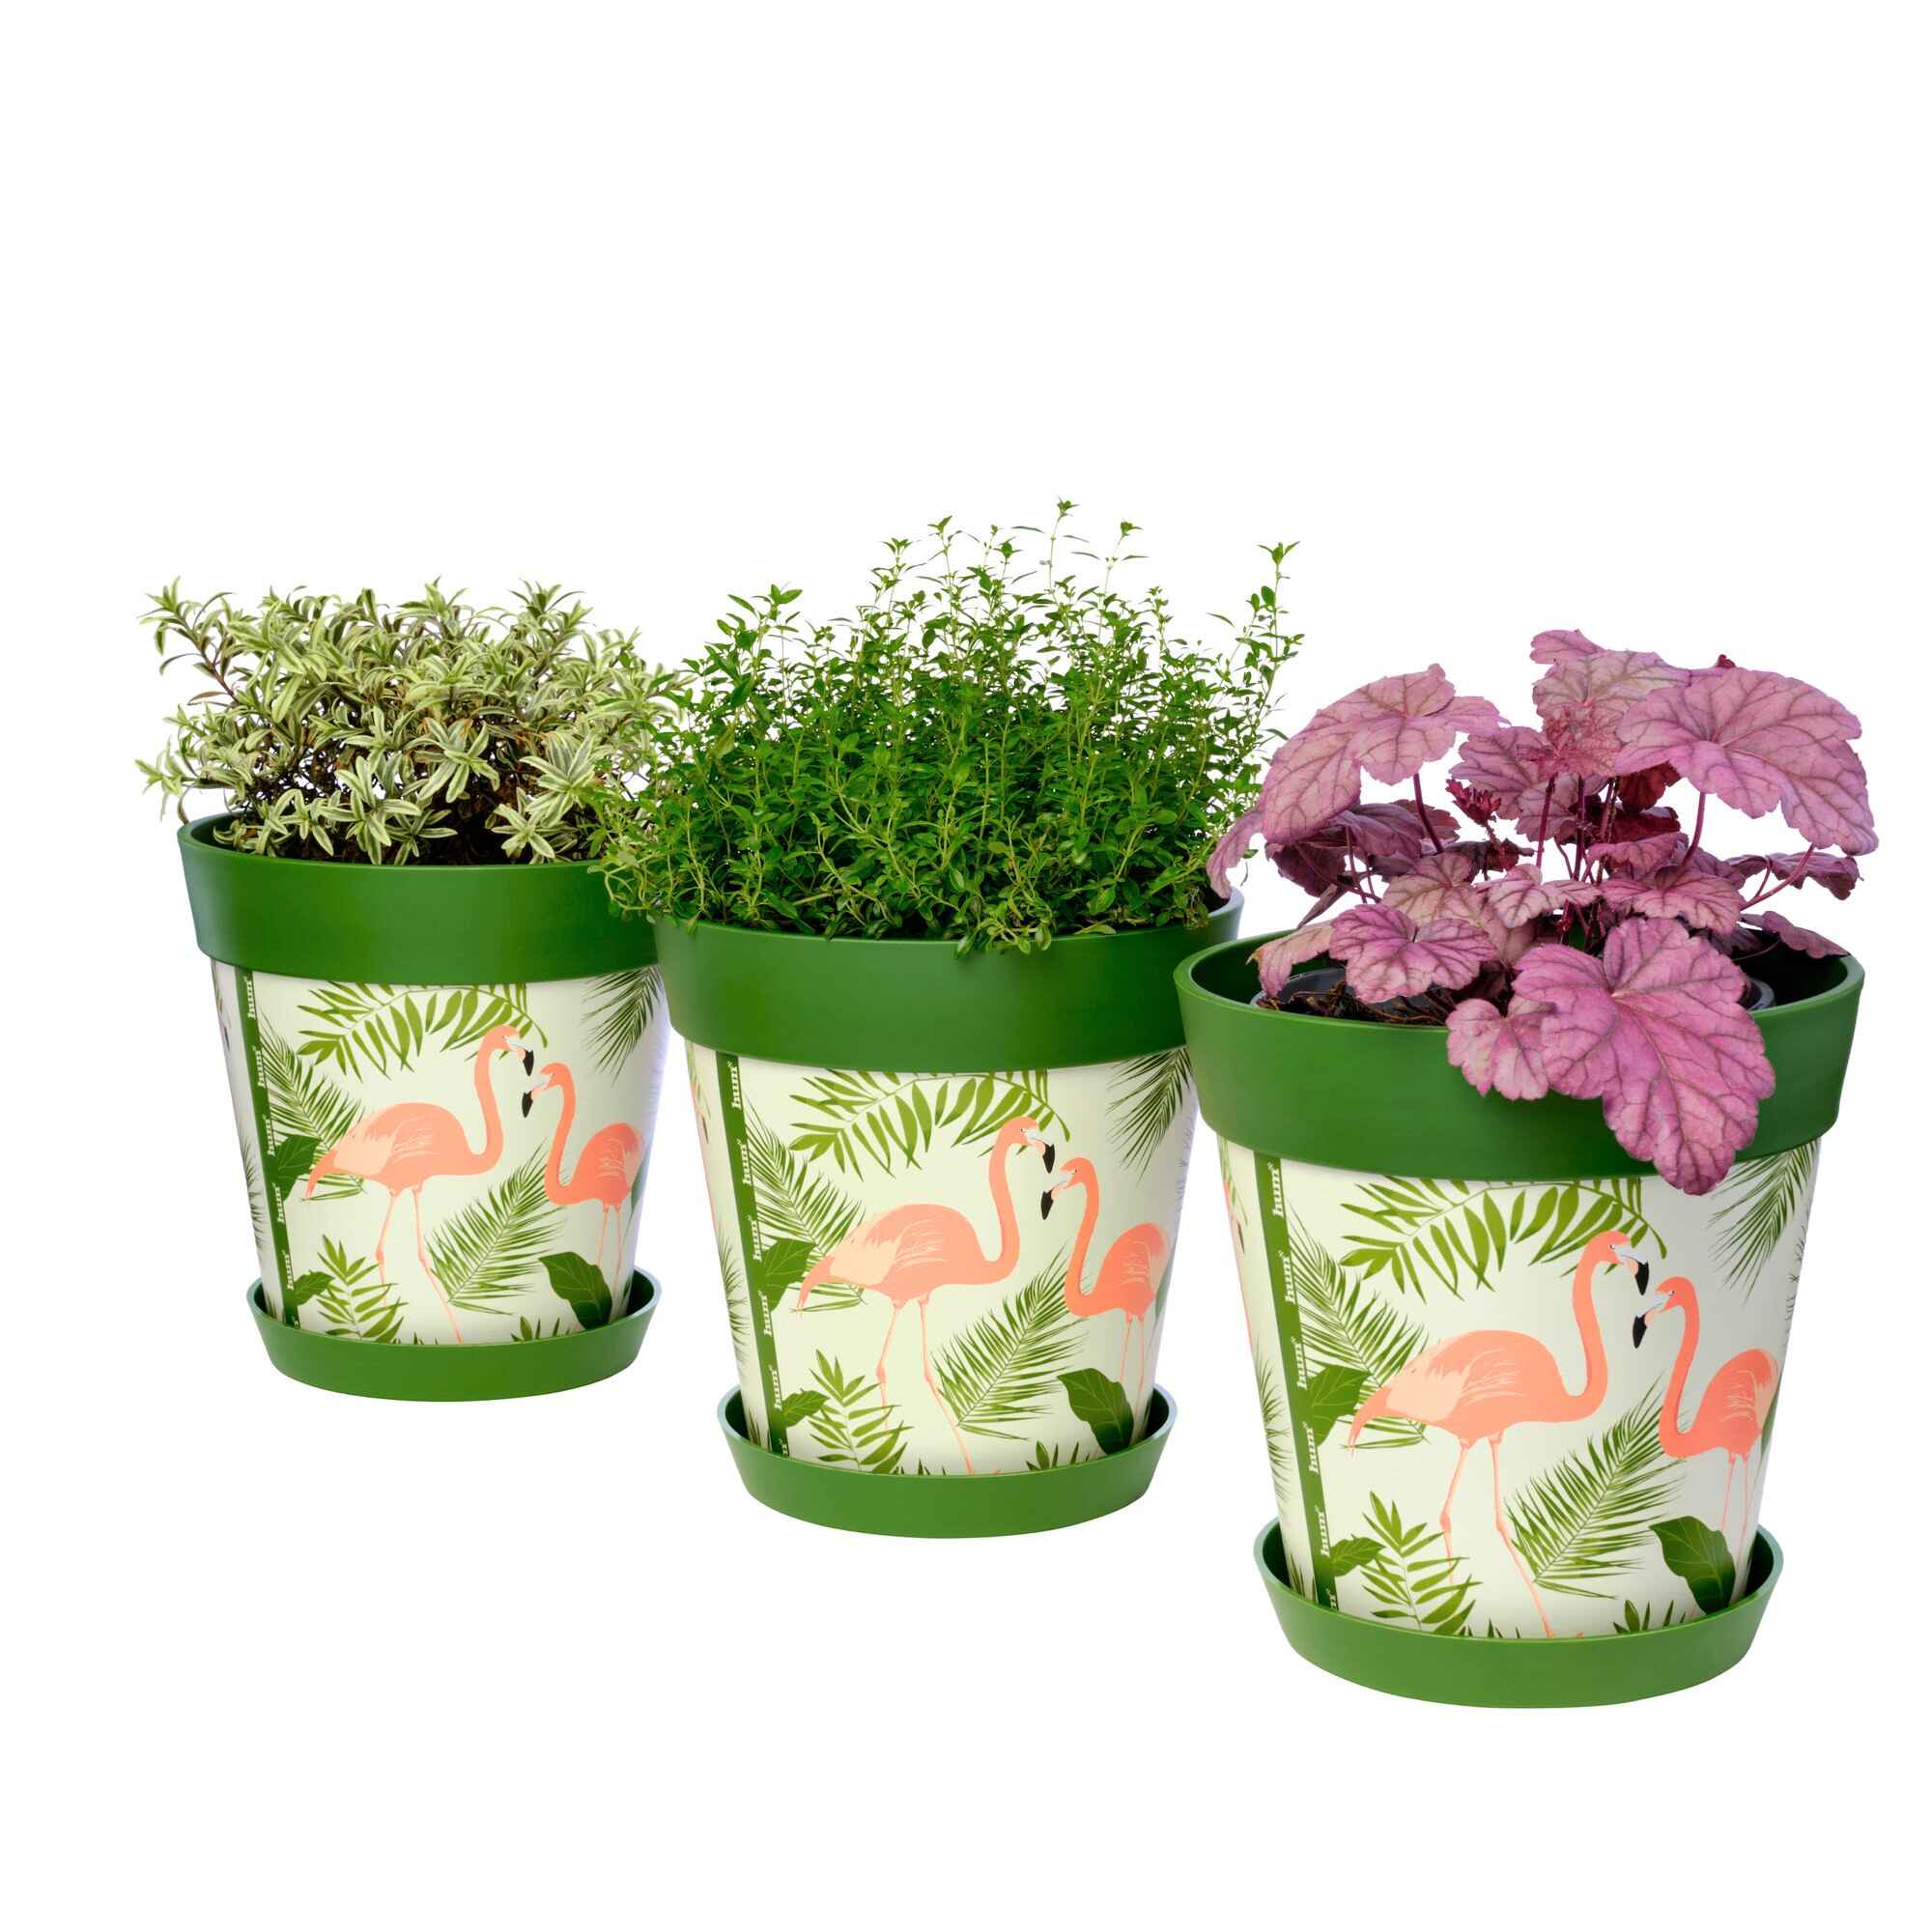 Picture of 3 Planted Medium 22cm Green Flamingo Pattern Indoor/Outdoor Flower Pot and Saucers 